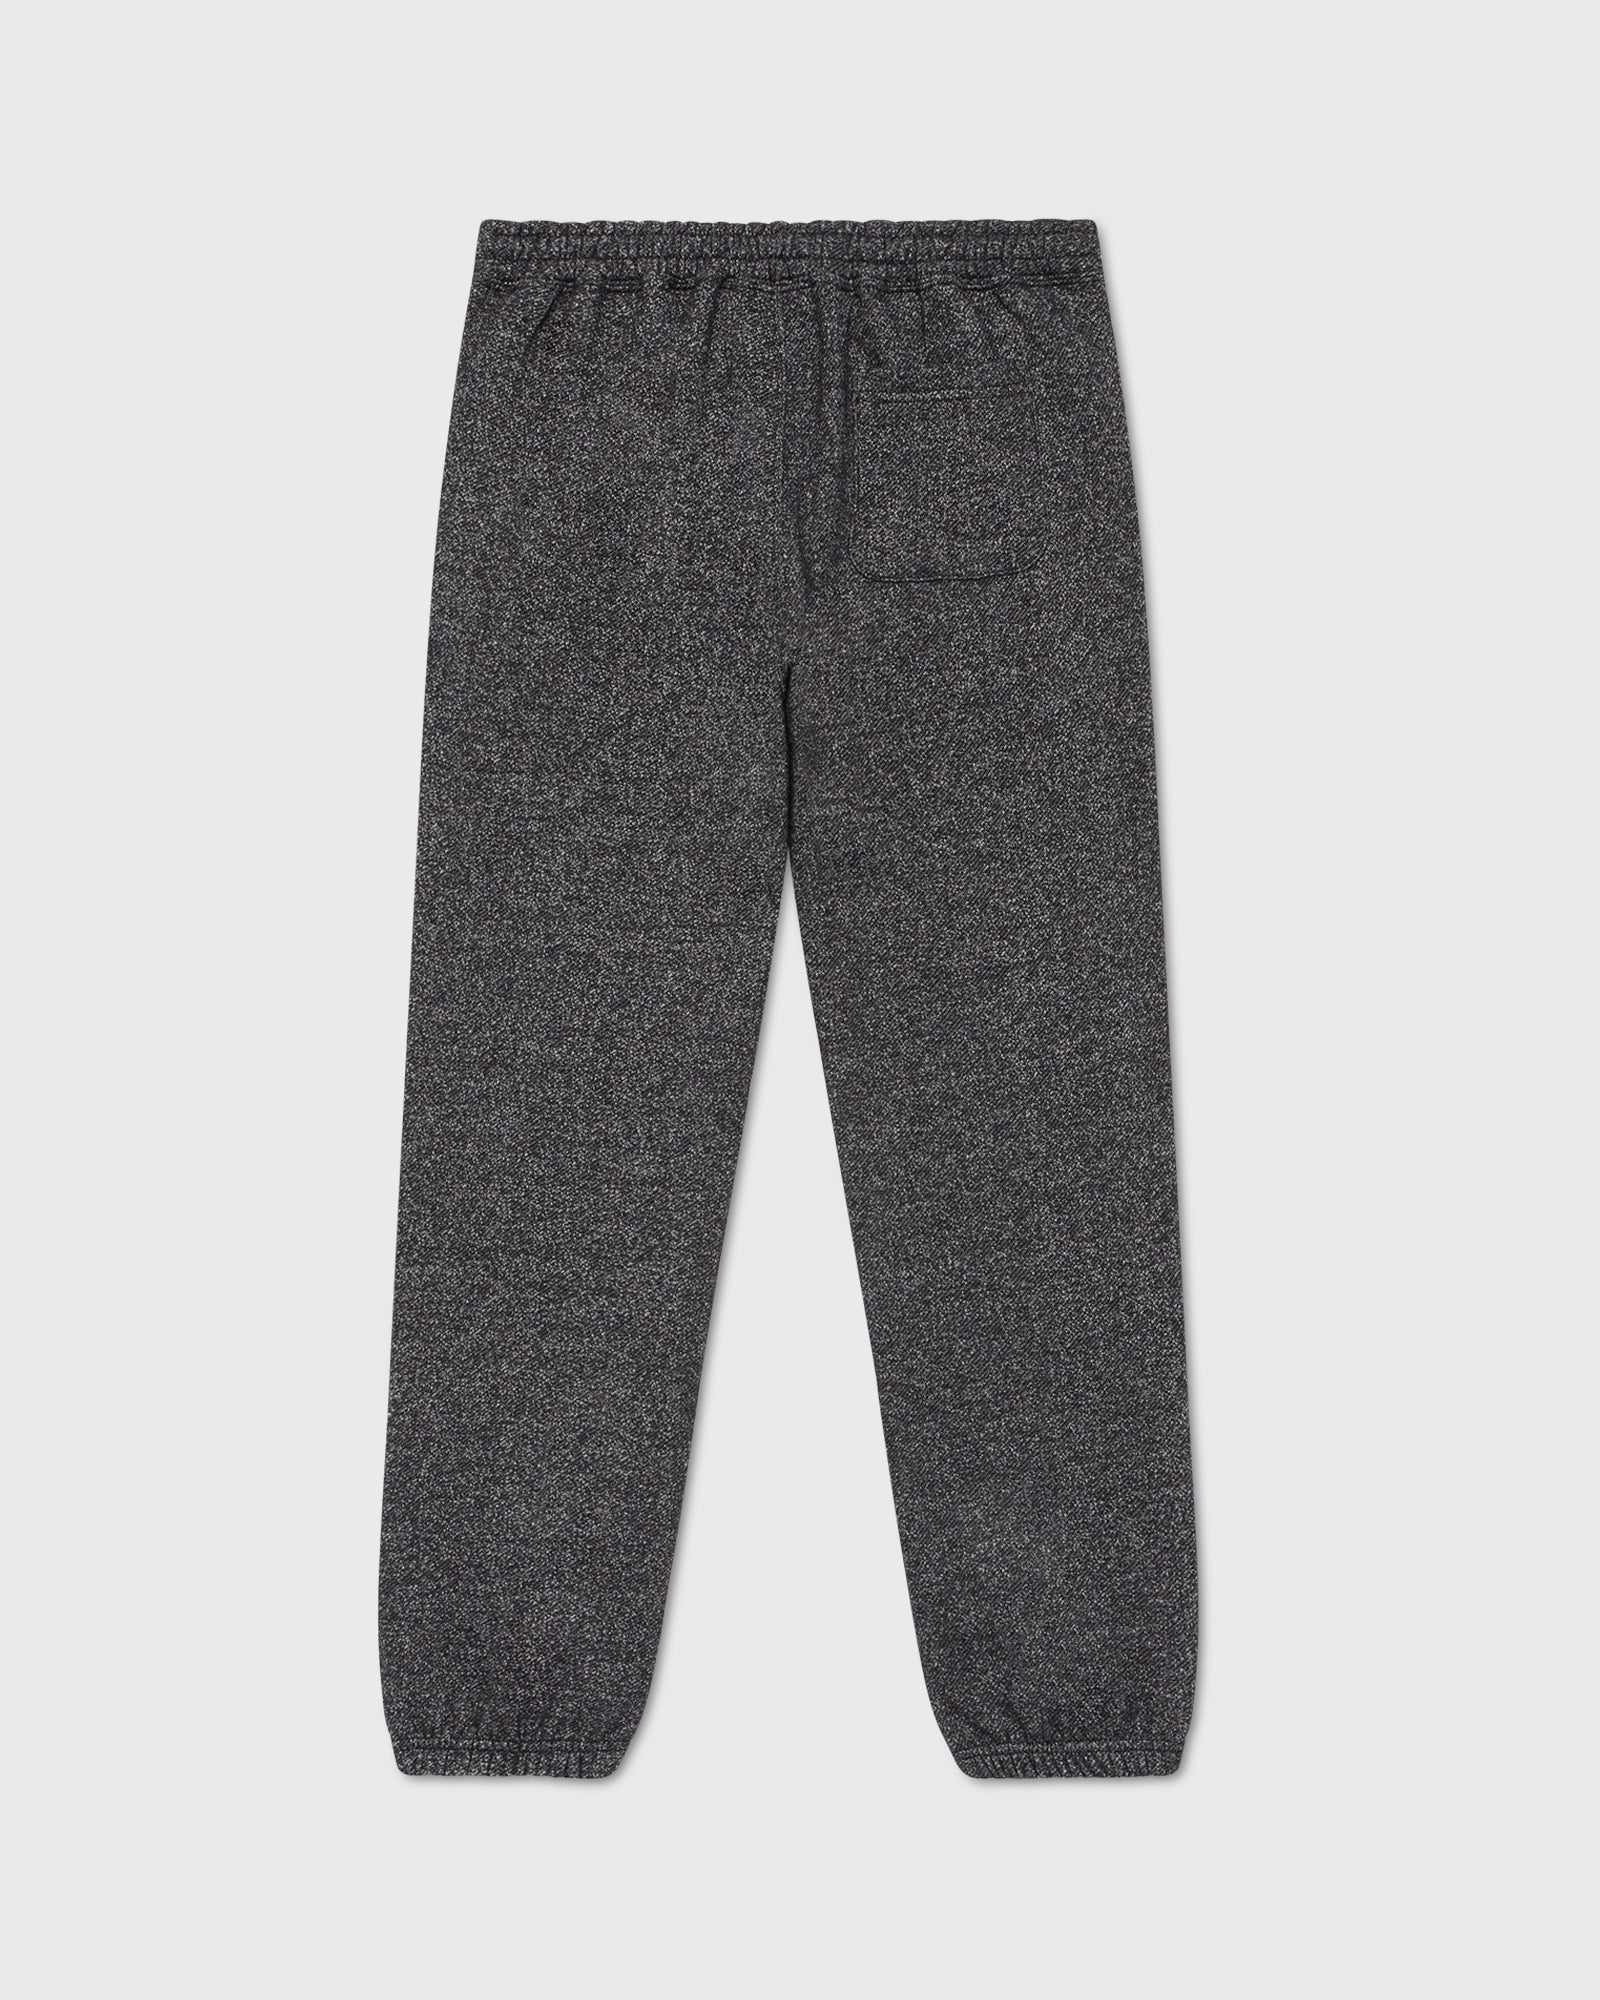 Speckle Fleece Relaxed Fit Sweatpant - Black